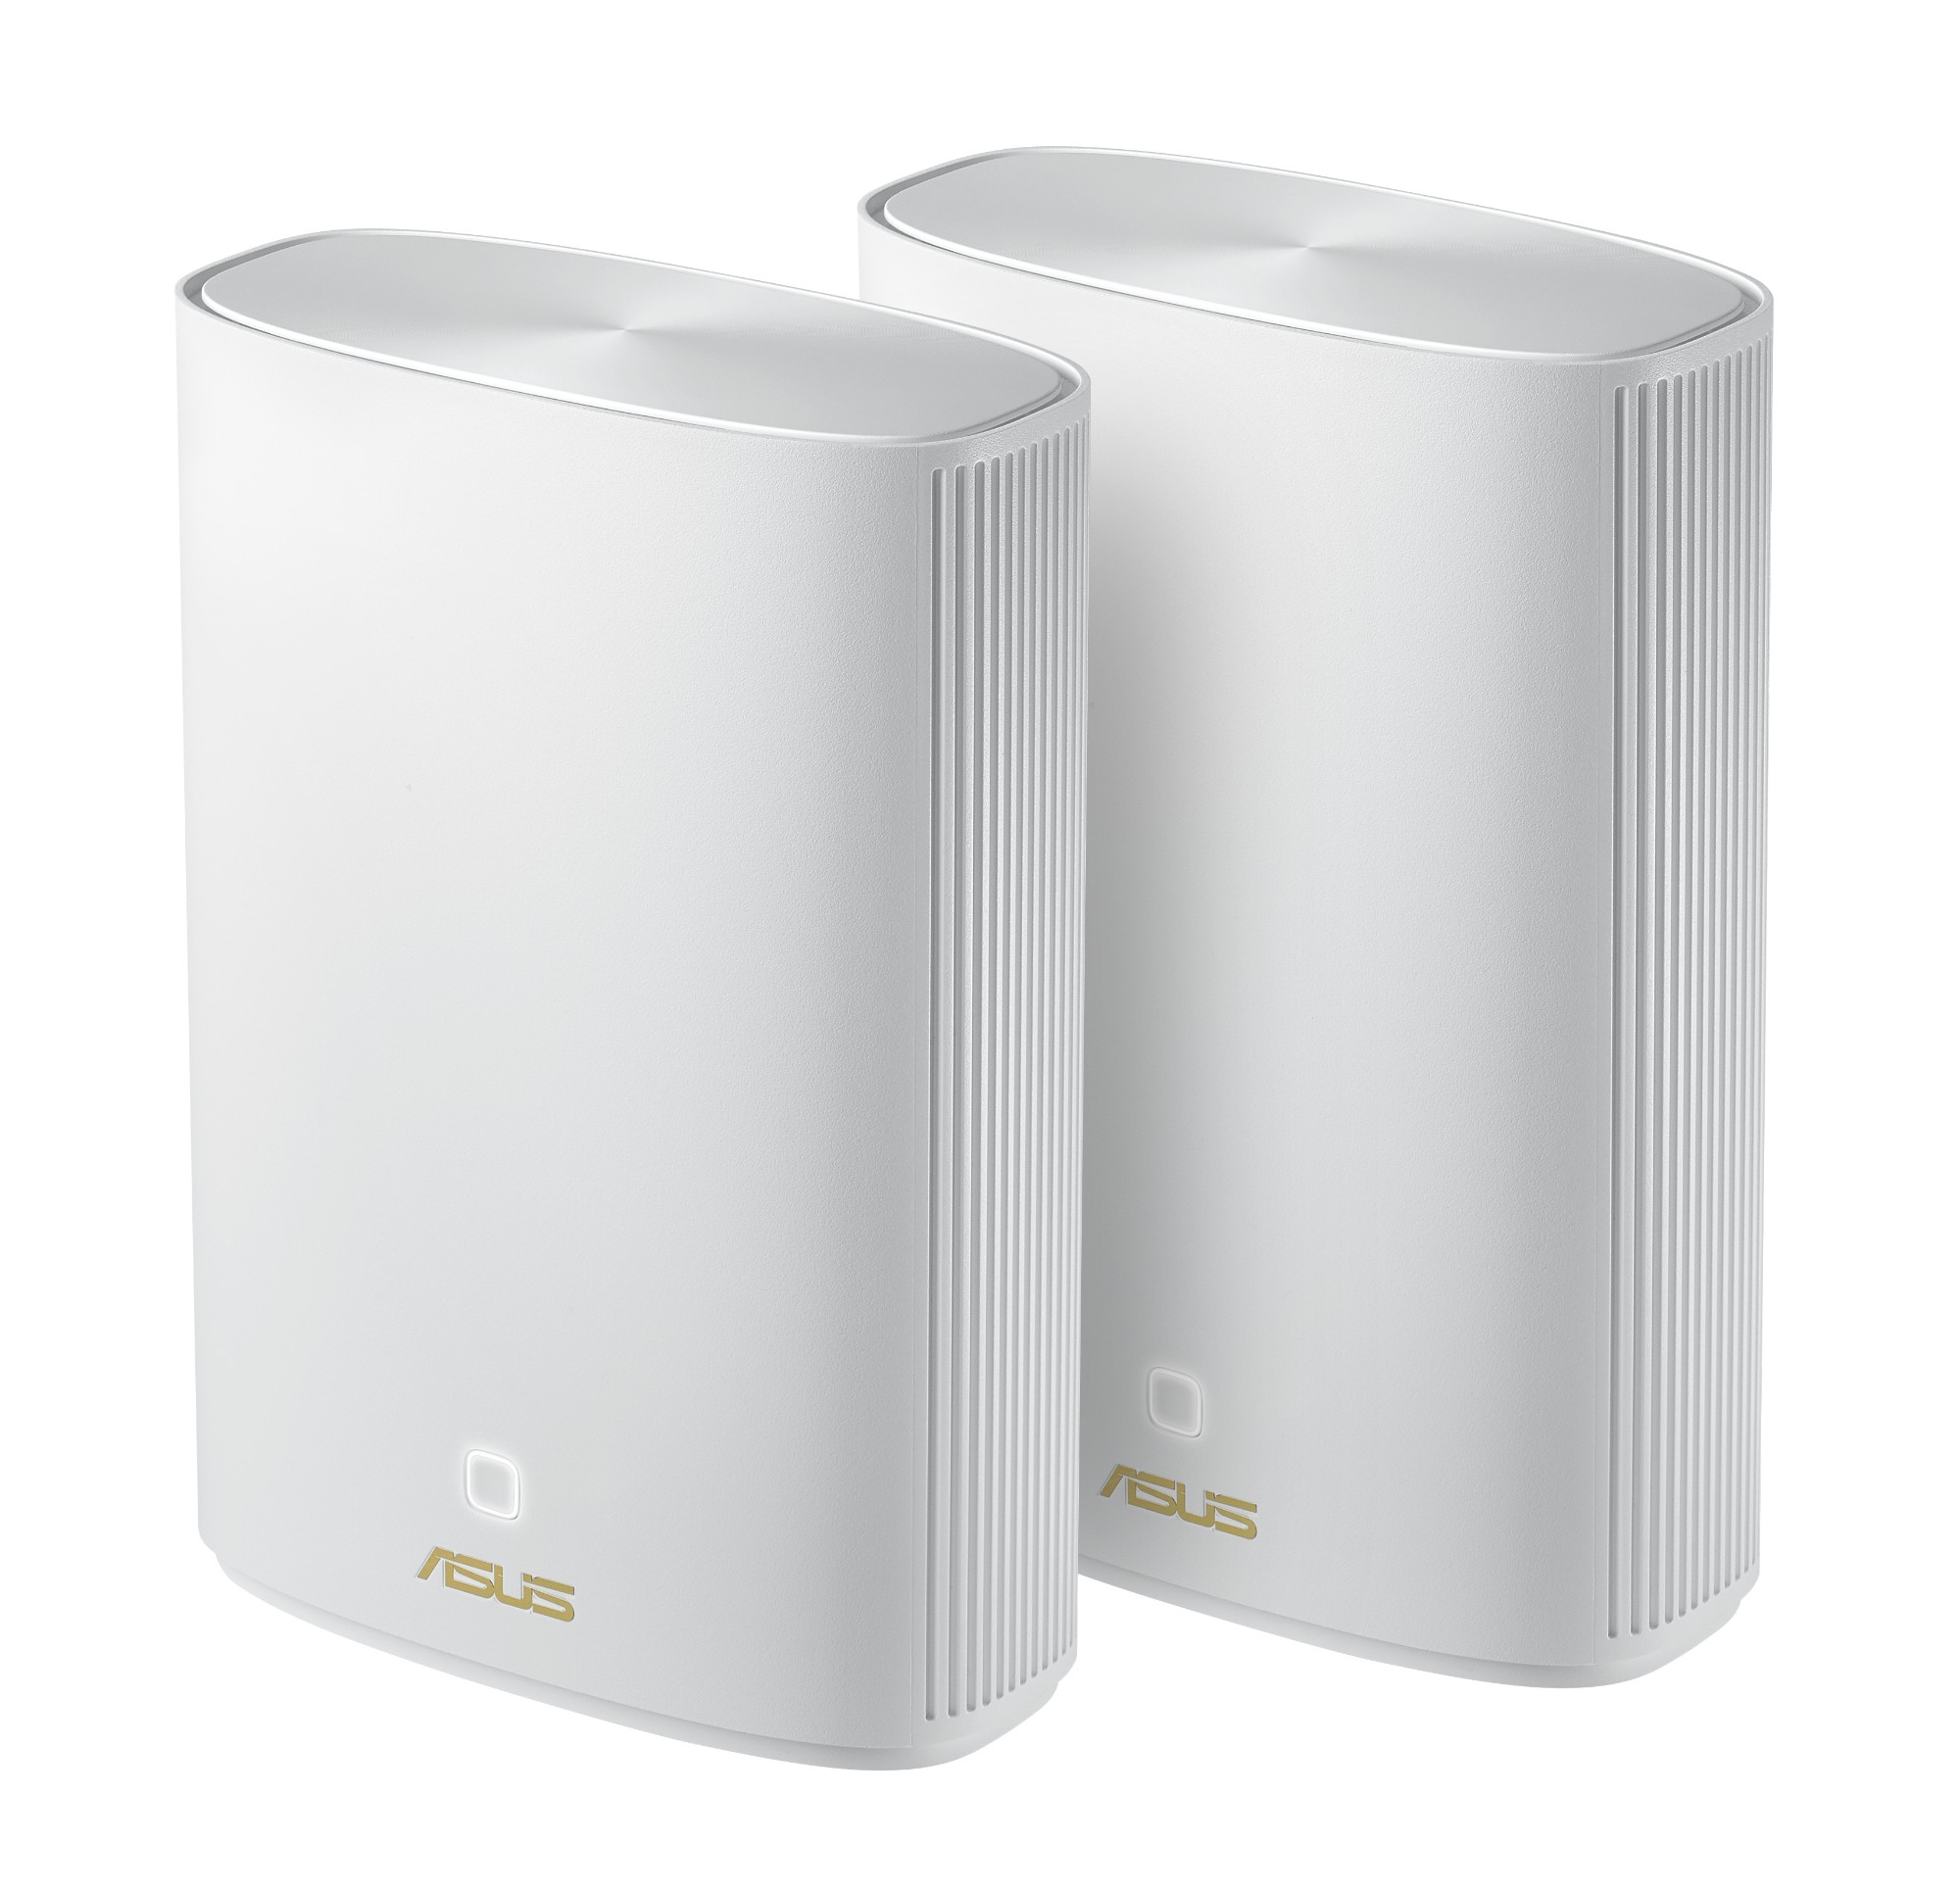 Asus ZenWiFi AX Hybrid (XP4) Pack of 2 - White